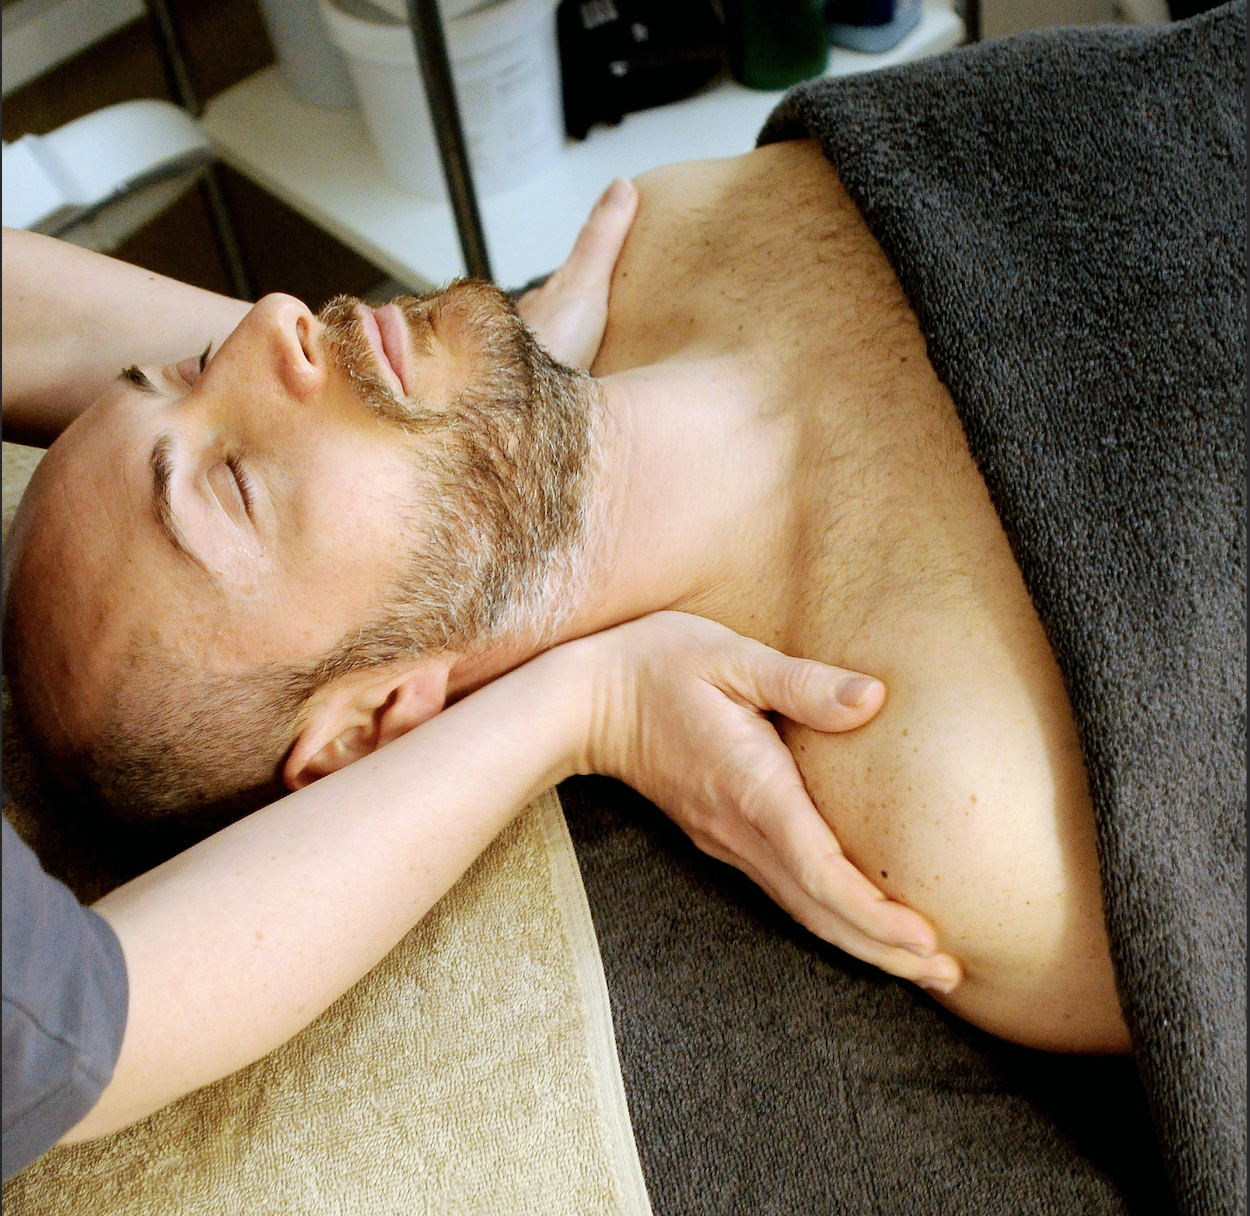 Hands placed on the shoulders of a man on massage table